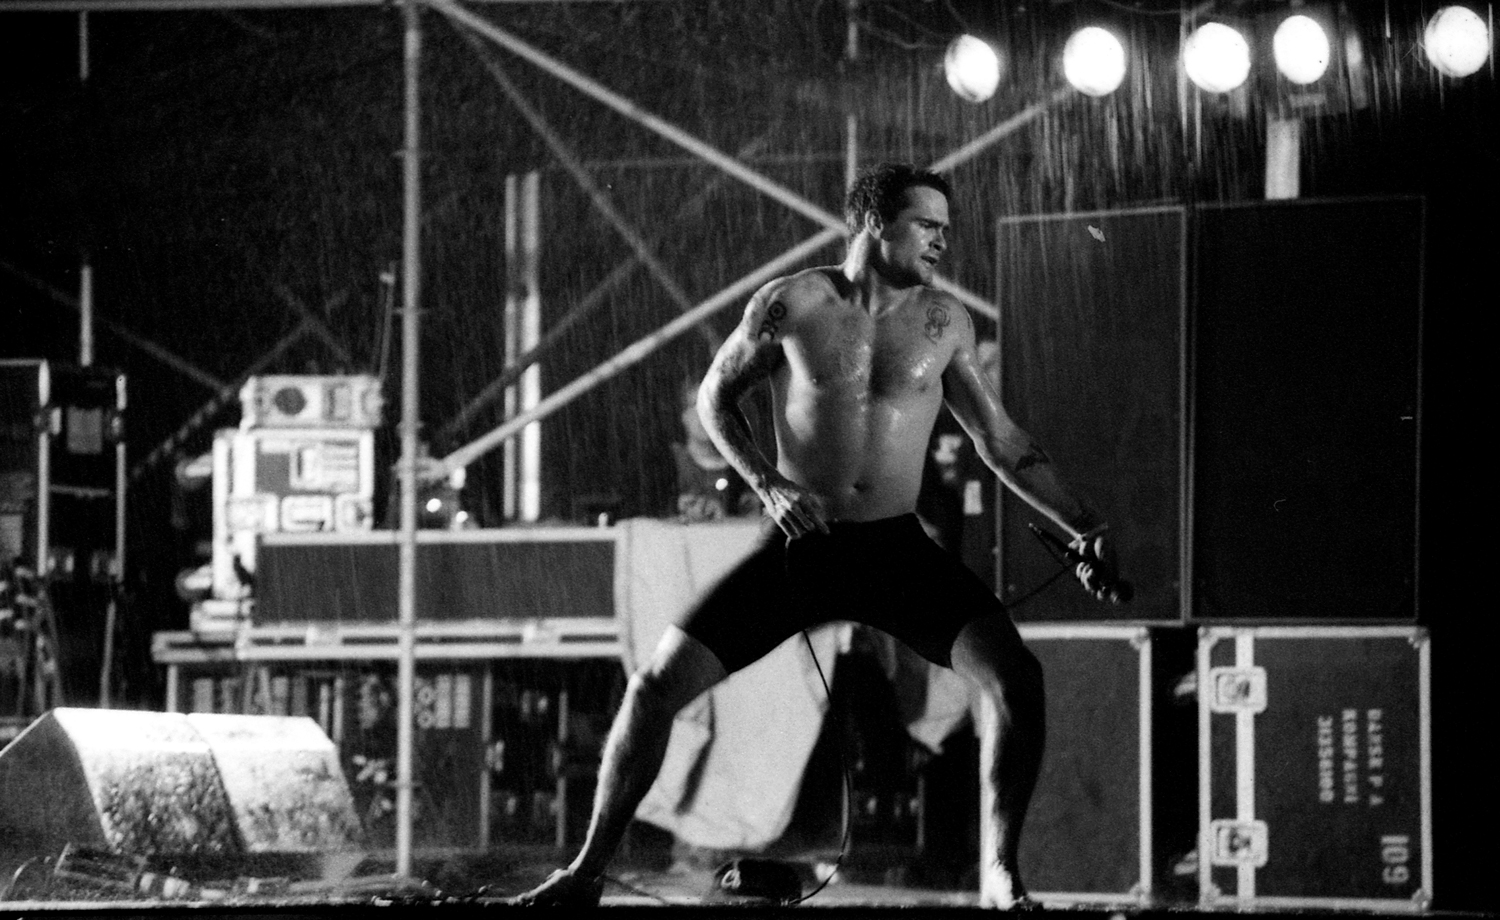 Rollins, shirtless, on stage and in the rain